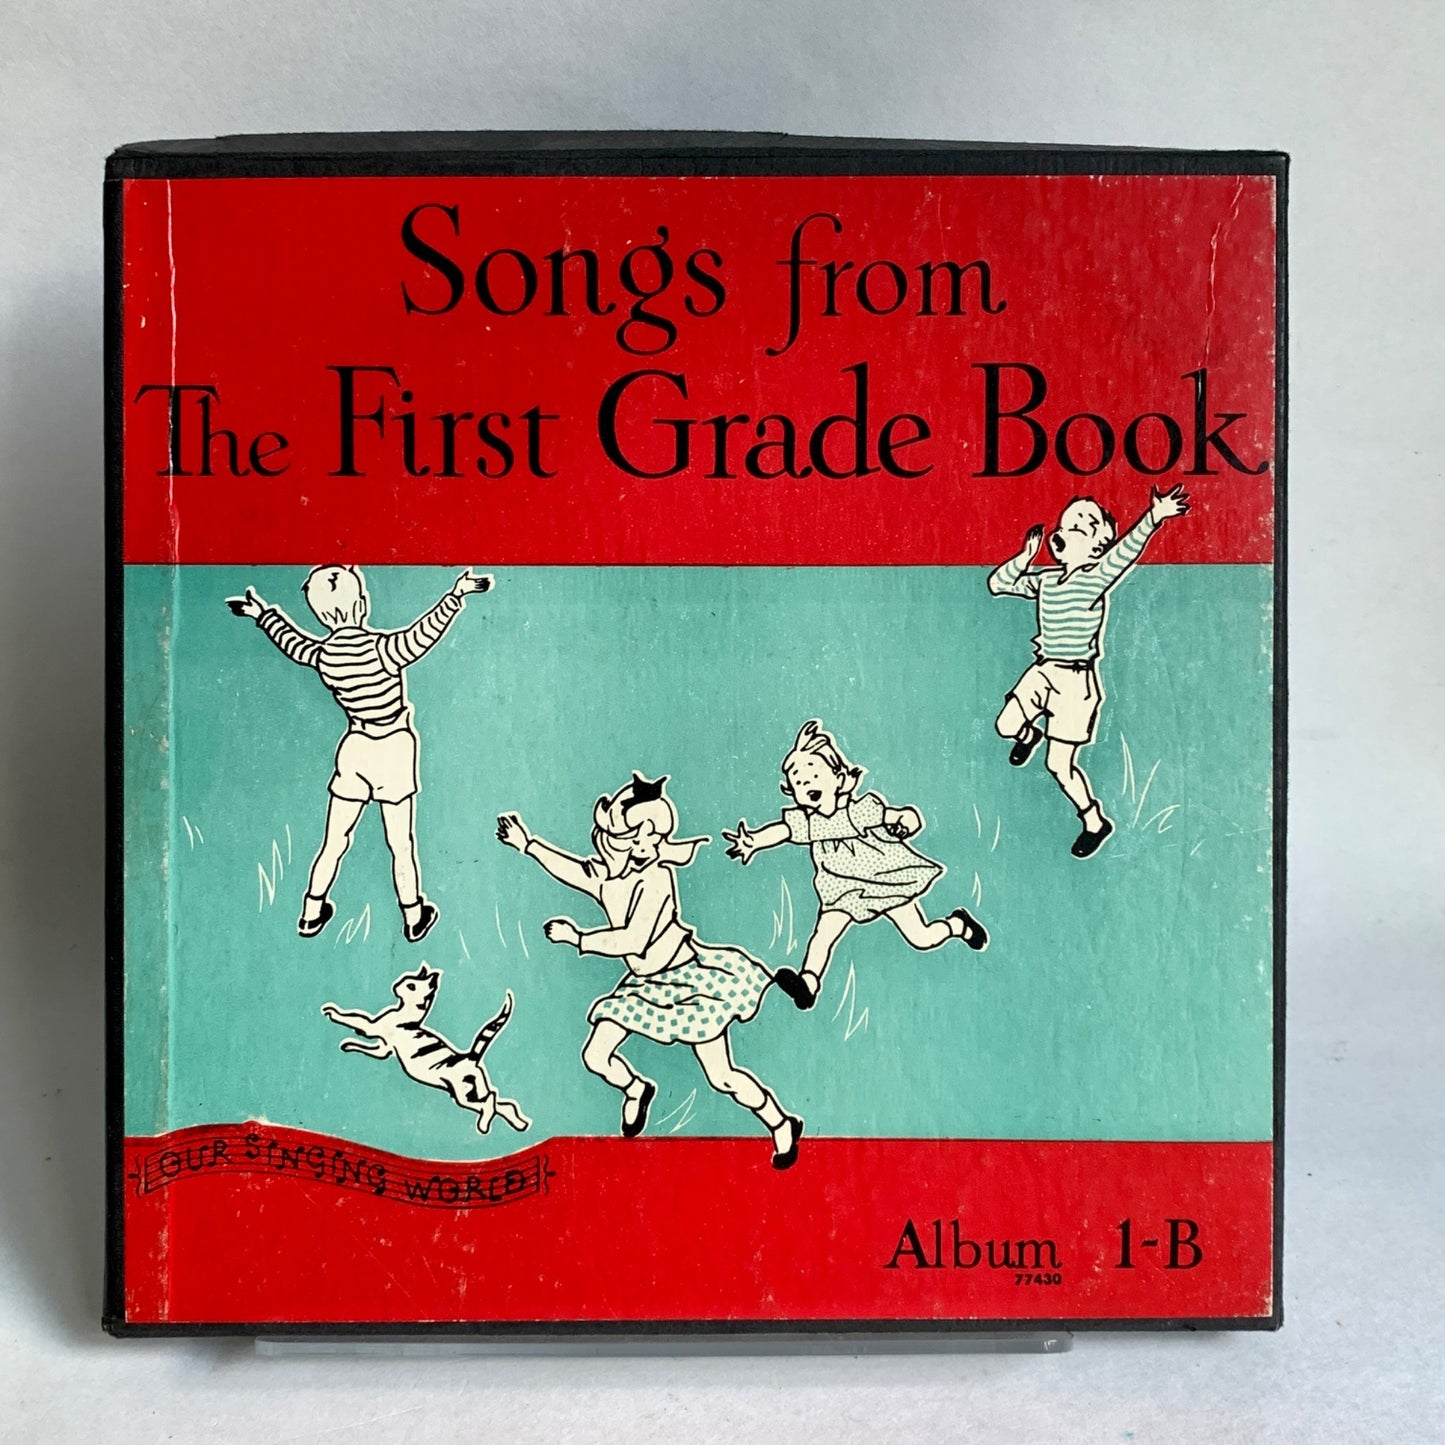 Songs from The First Grade Book Album 1-B Vinyl Records Set